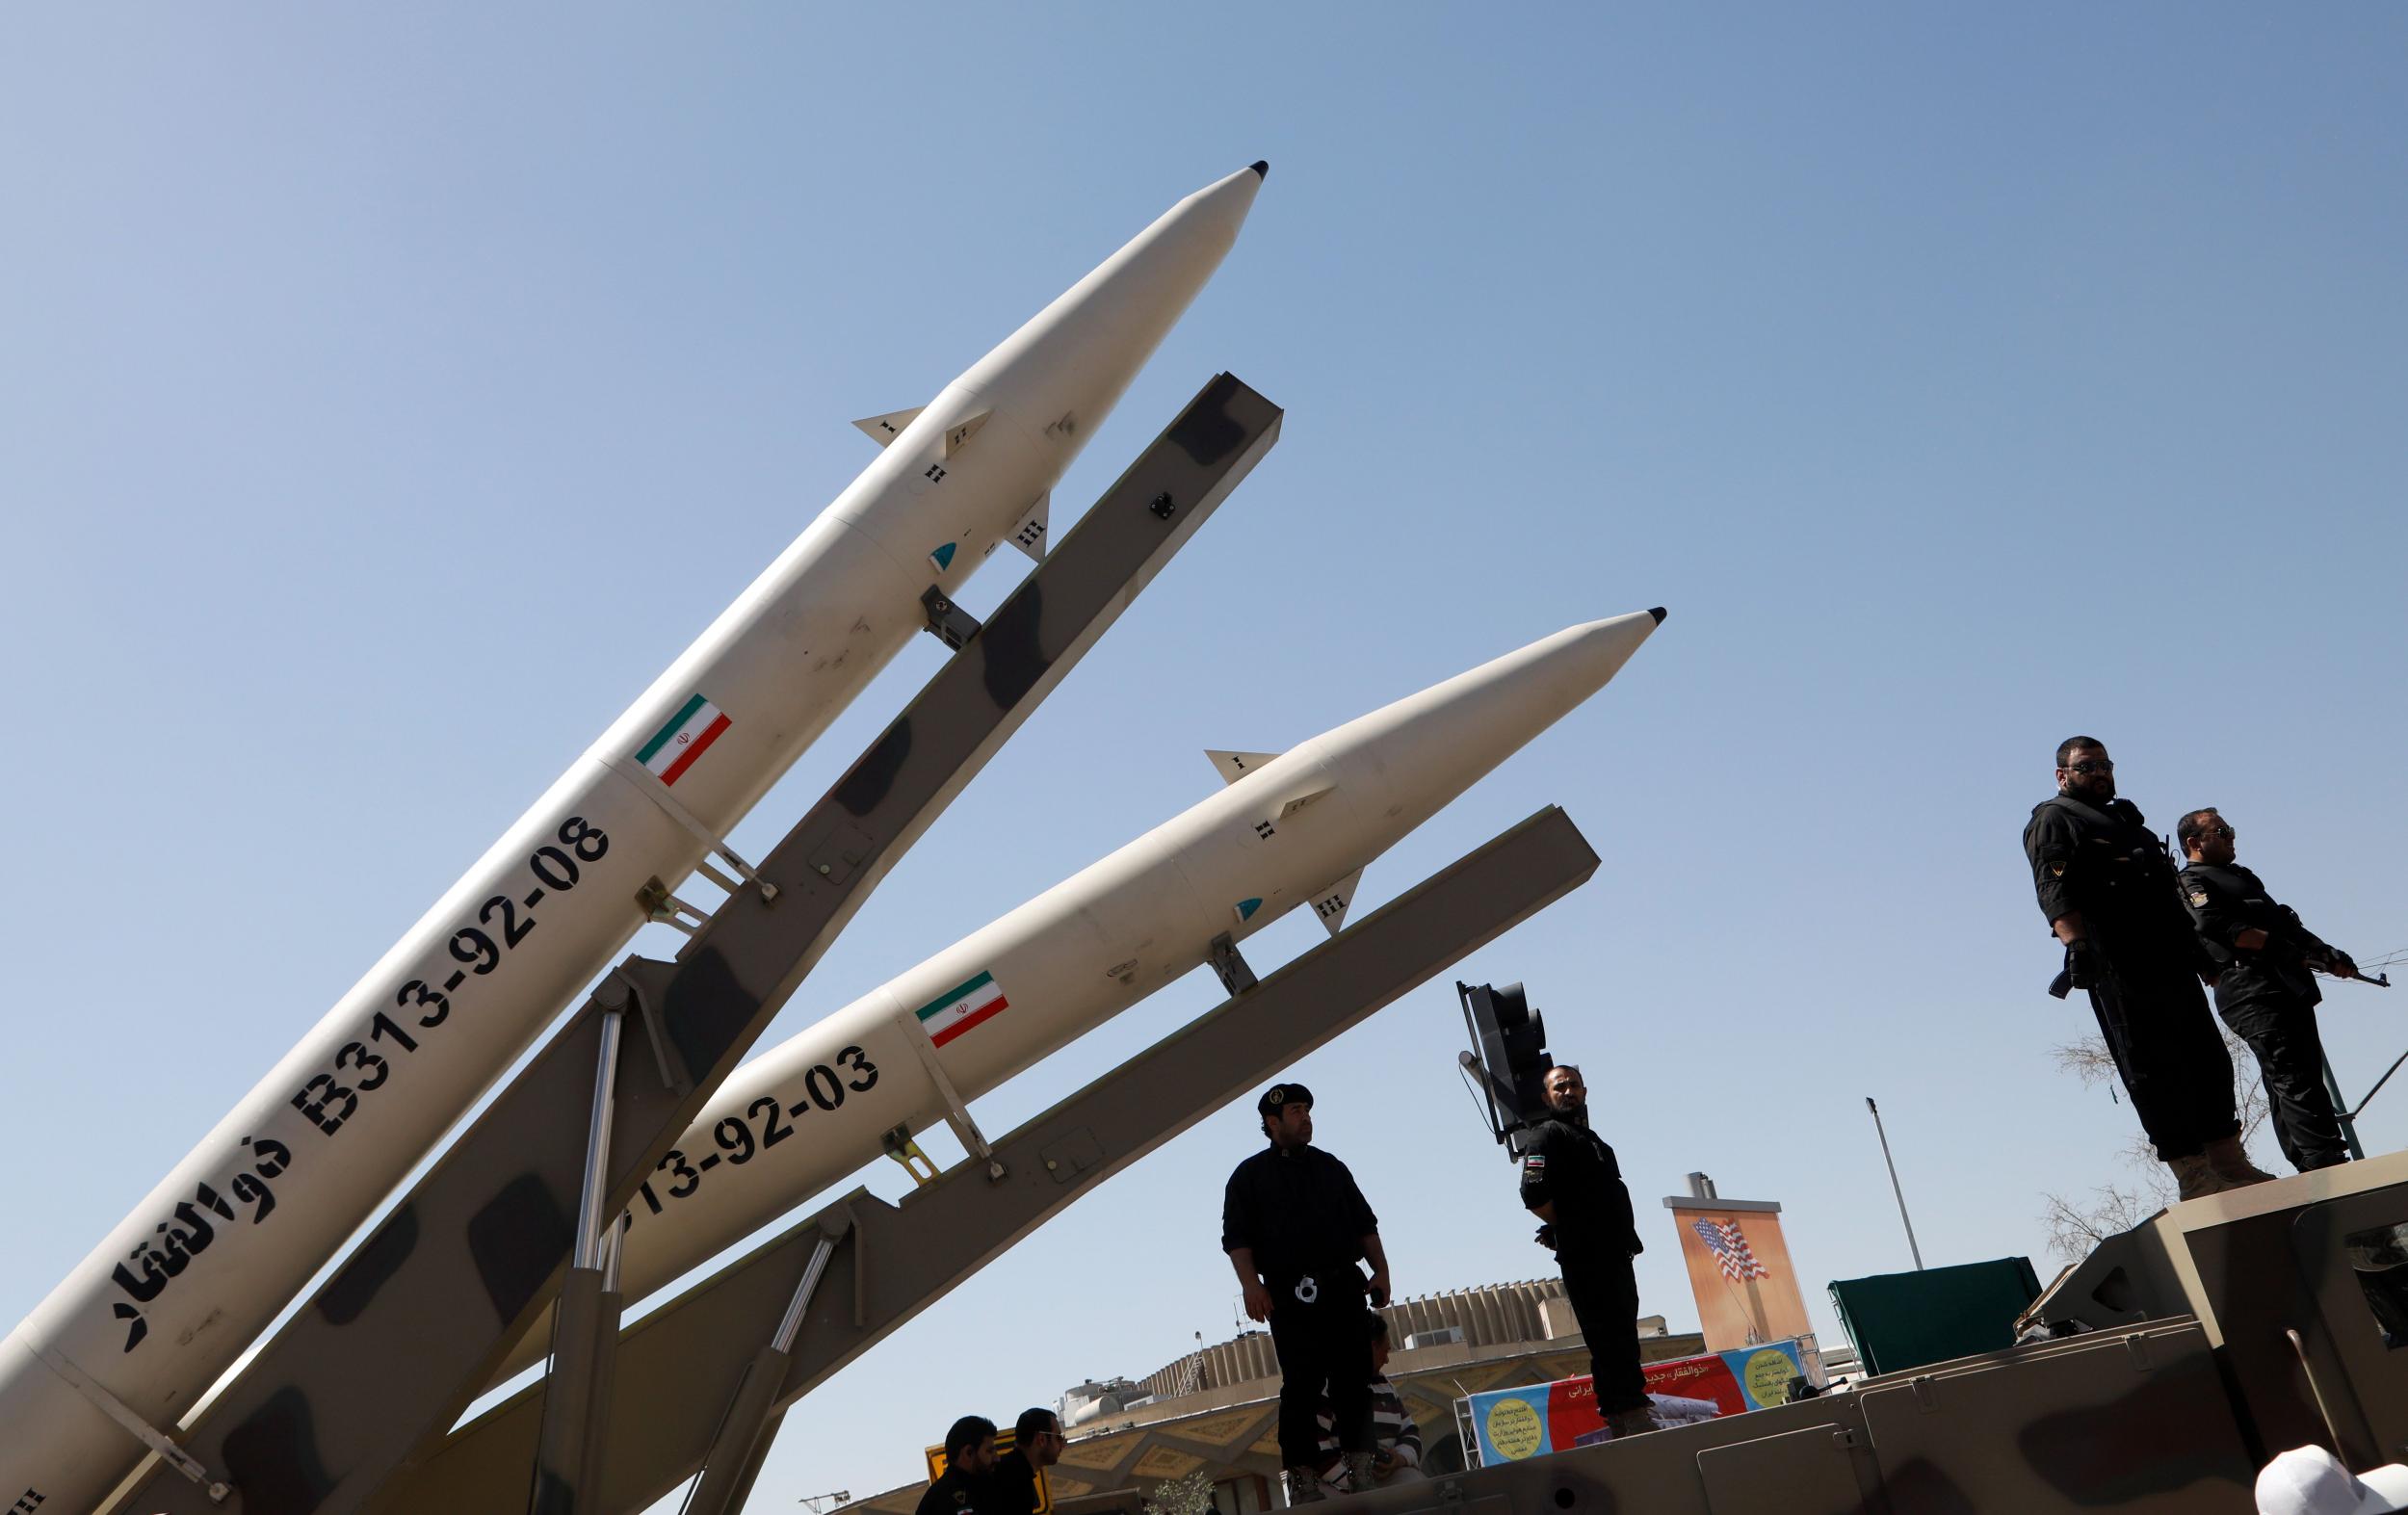 Zolfaghar missiles are displayed during a rally marking al-Quds (Jerusalem) Day in Tehran (AFP/Getty)